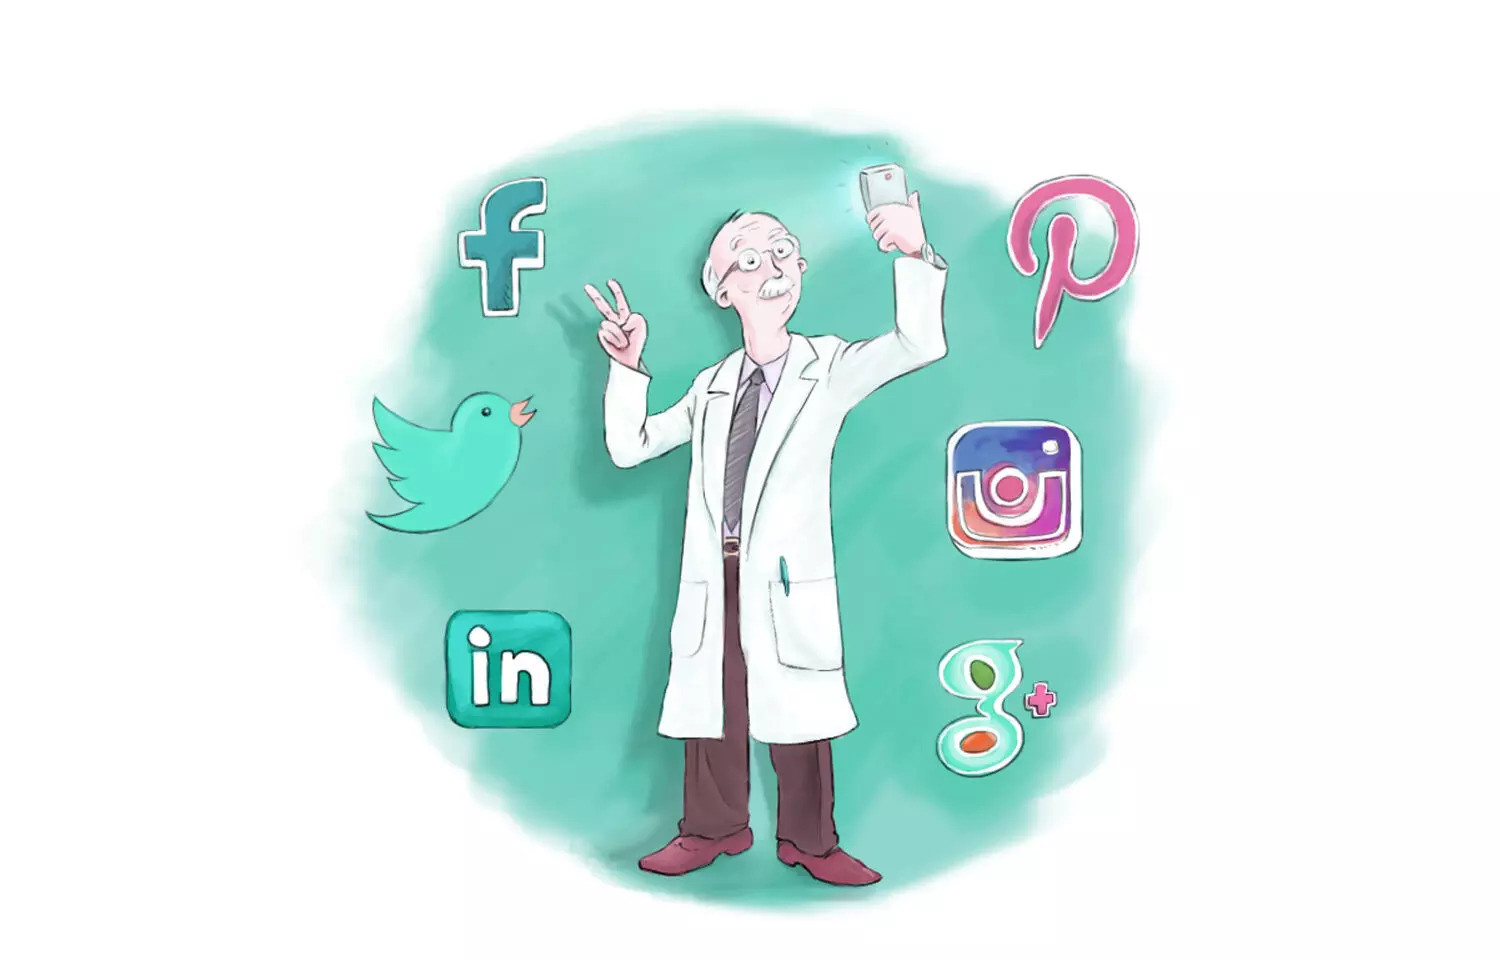 No Likes, Follows, Paid Ratings: Here is what NMC new ethics guidelines spell out to doctors on use of Social Media